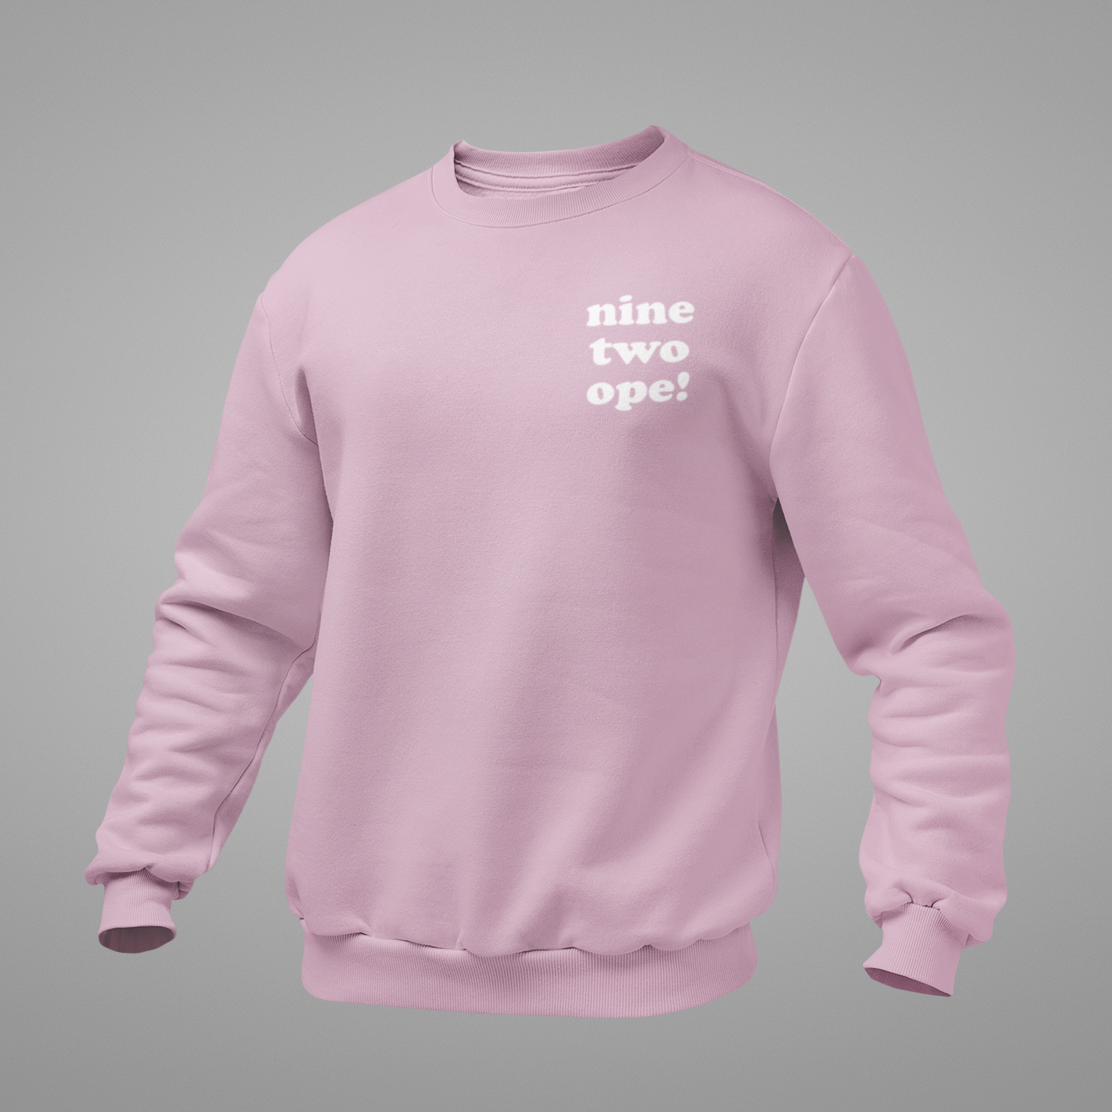 Pale Pink "nine two ope!" Area Code Crewneck Sweatshirt - 3D Puff Lettering